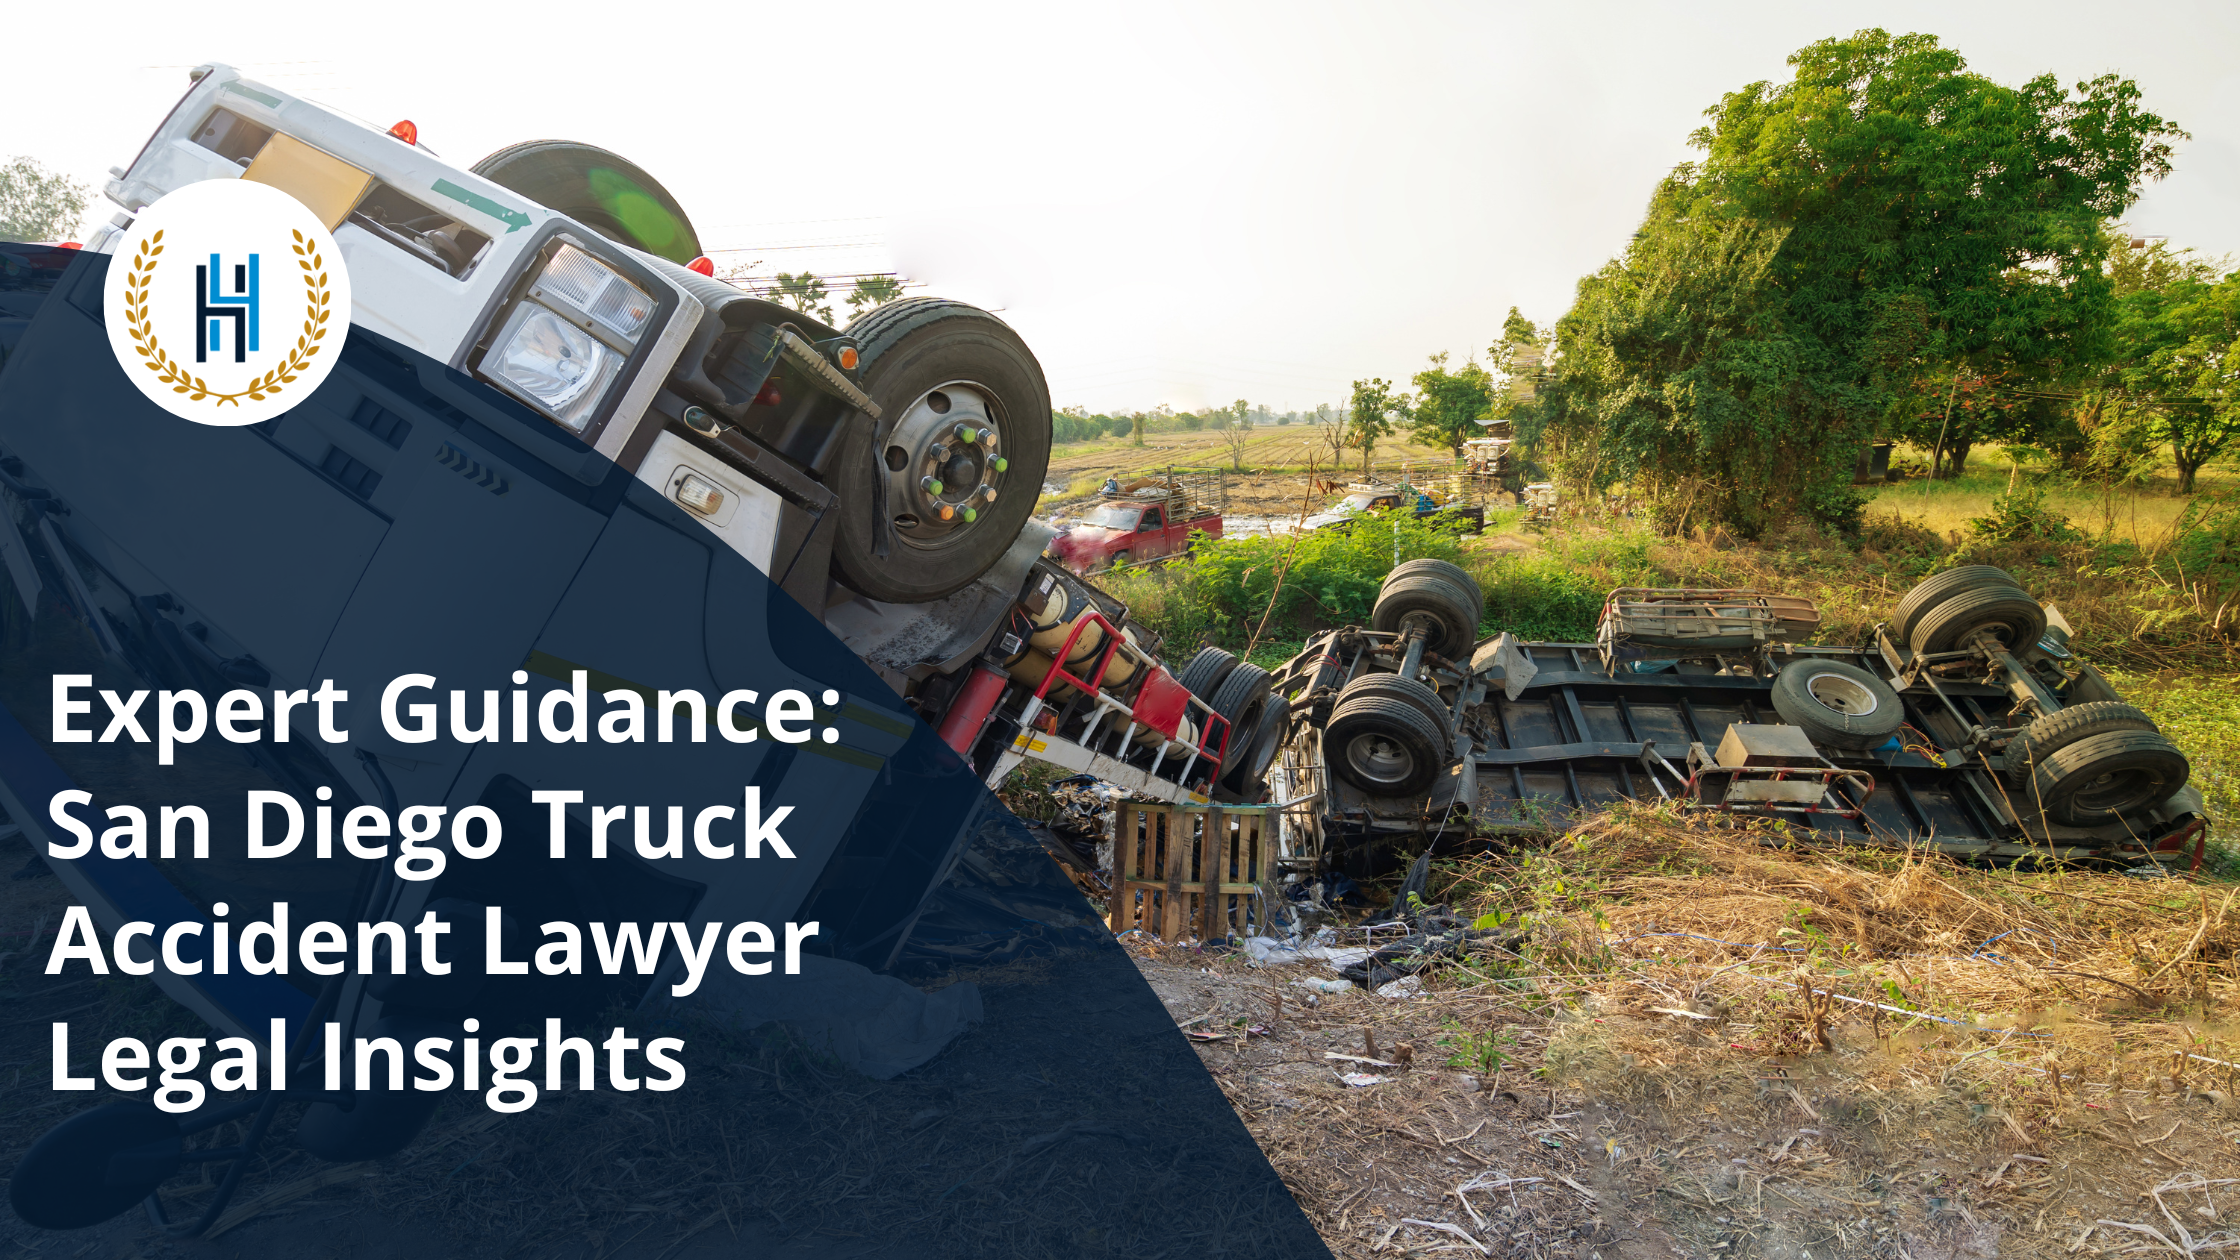 Expert Guidance San Diego Truck Accident Lawyer Legal Insights | 2H Law